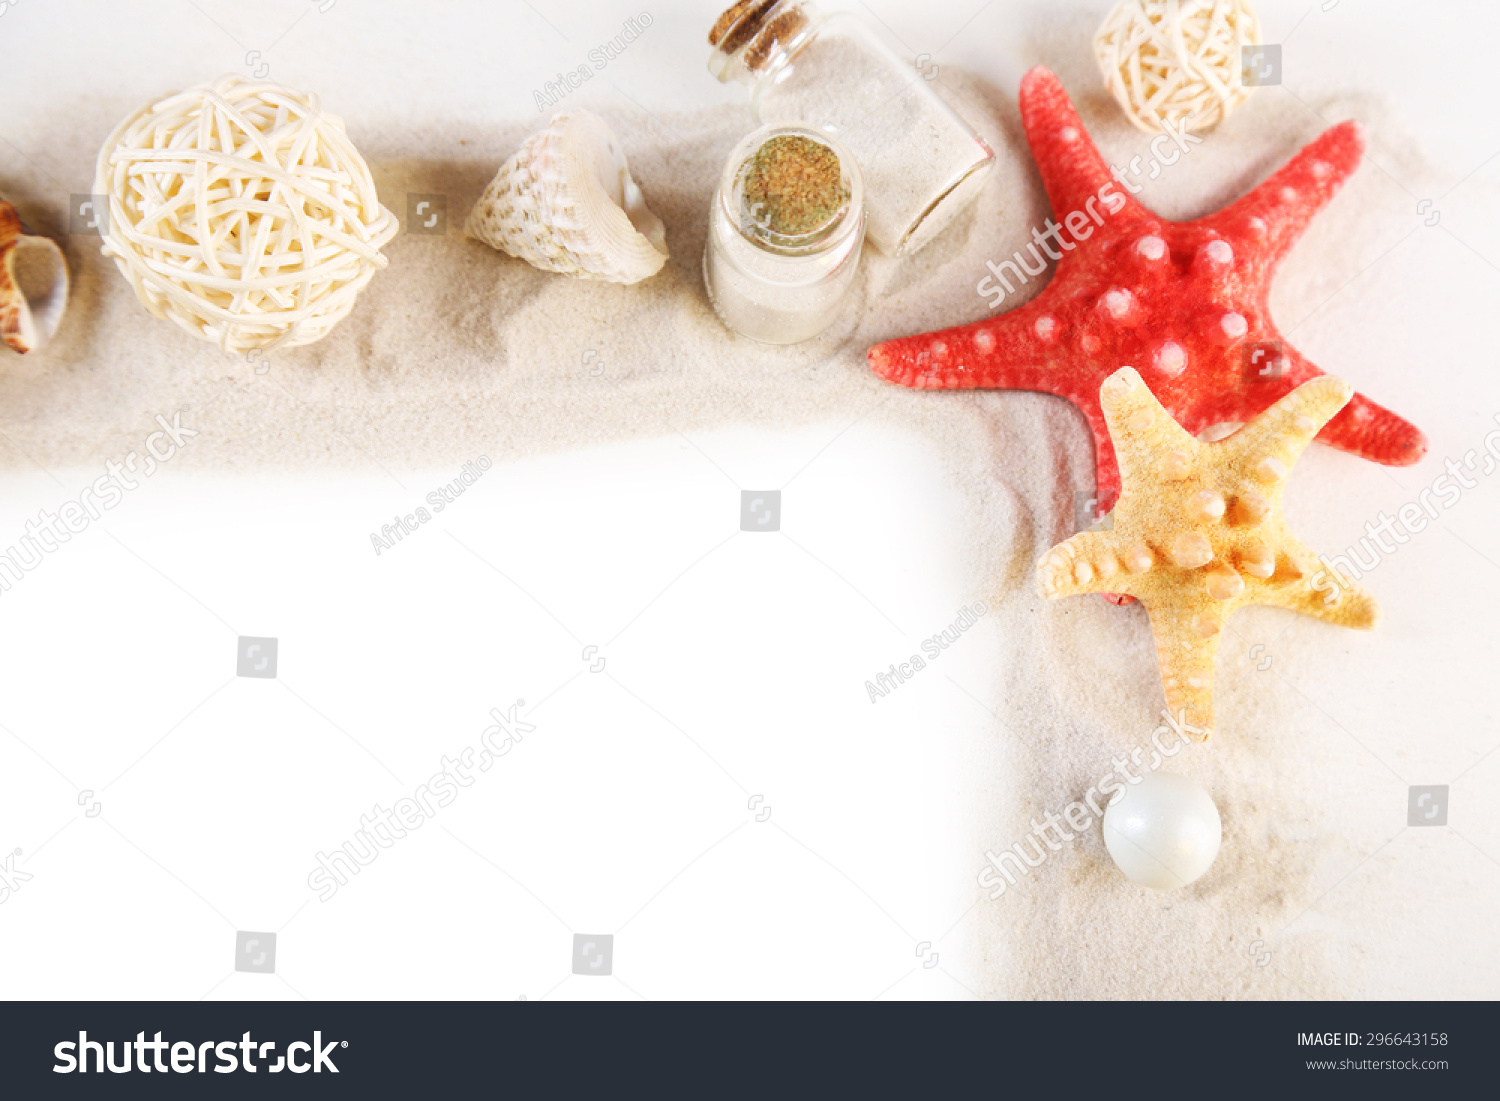 Frame of collection of seashells and sand isolated on white #296643158